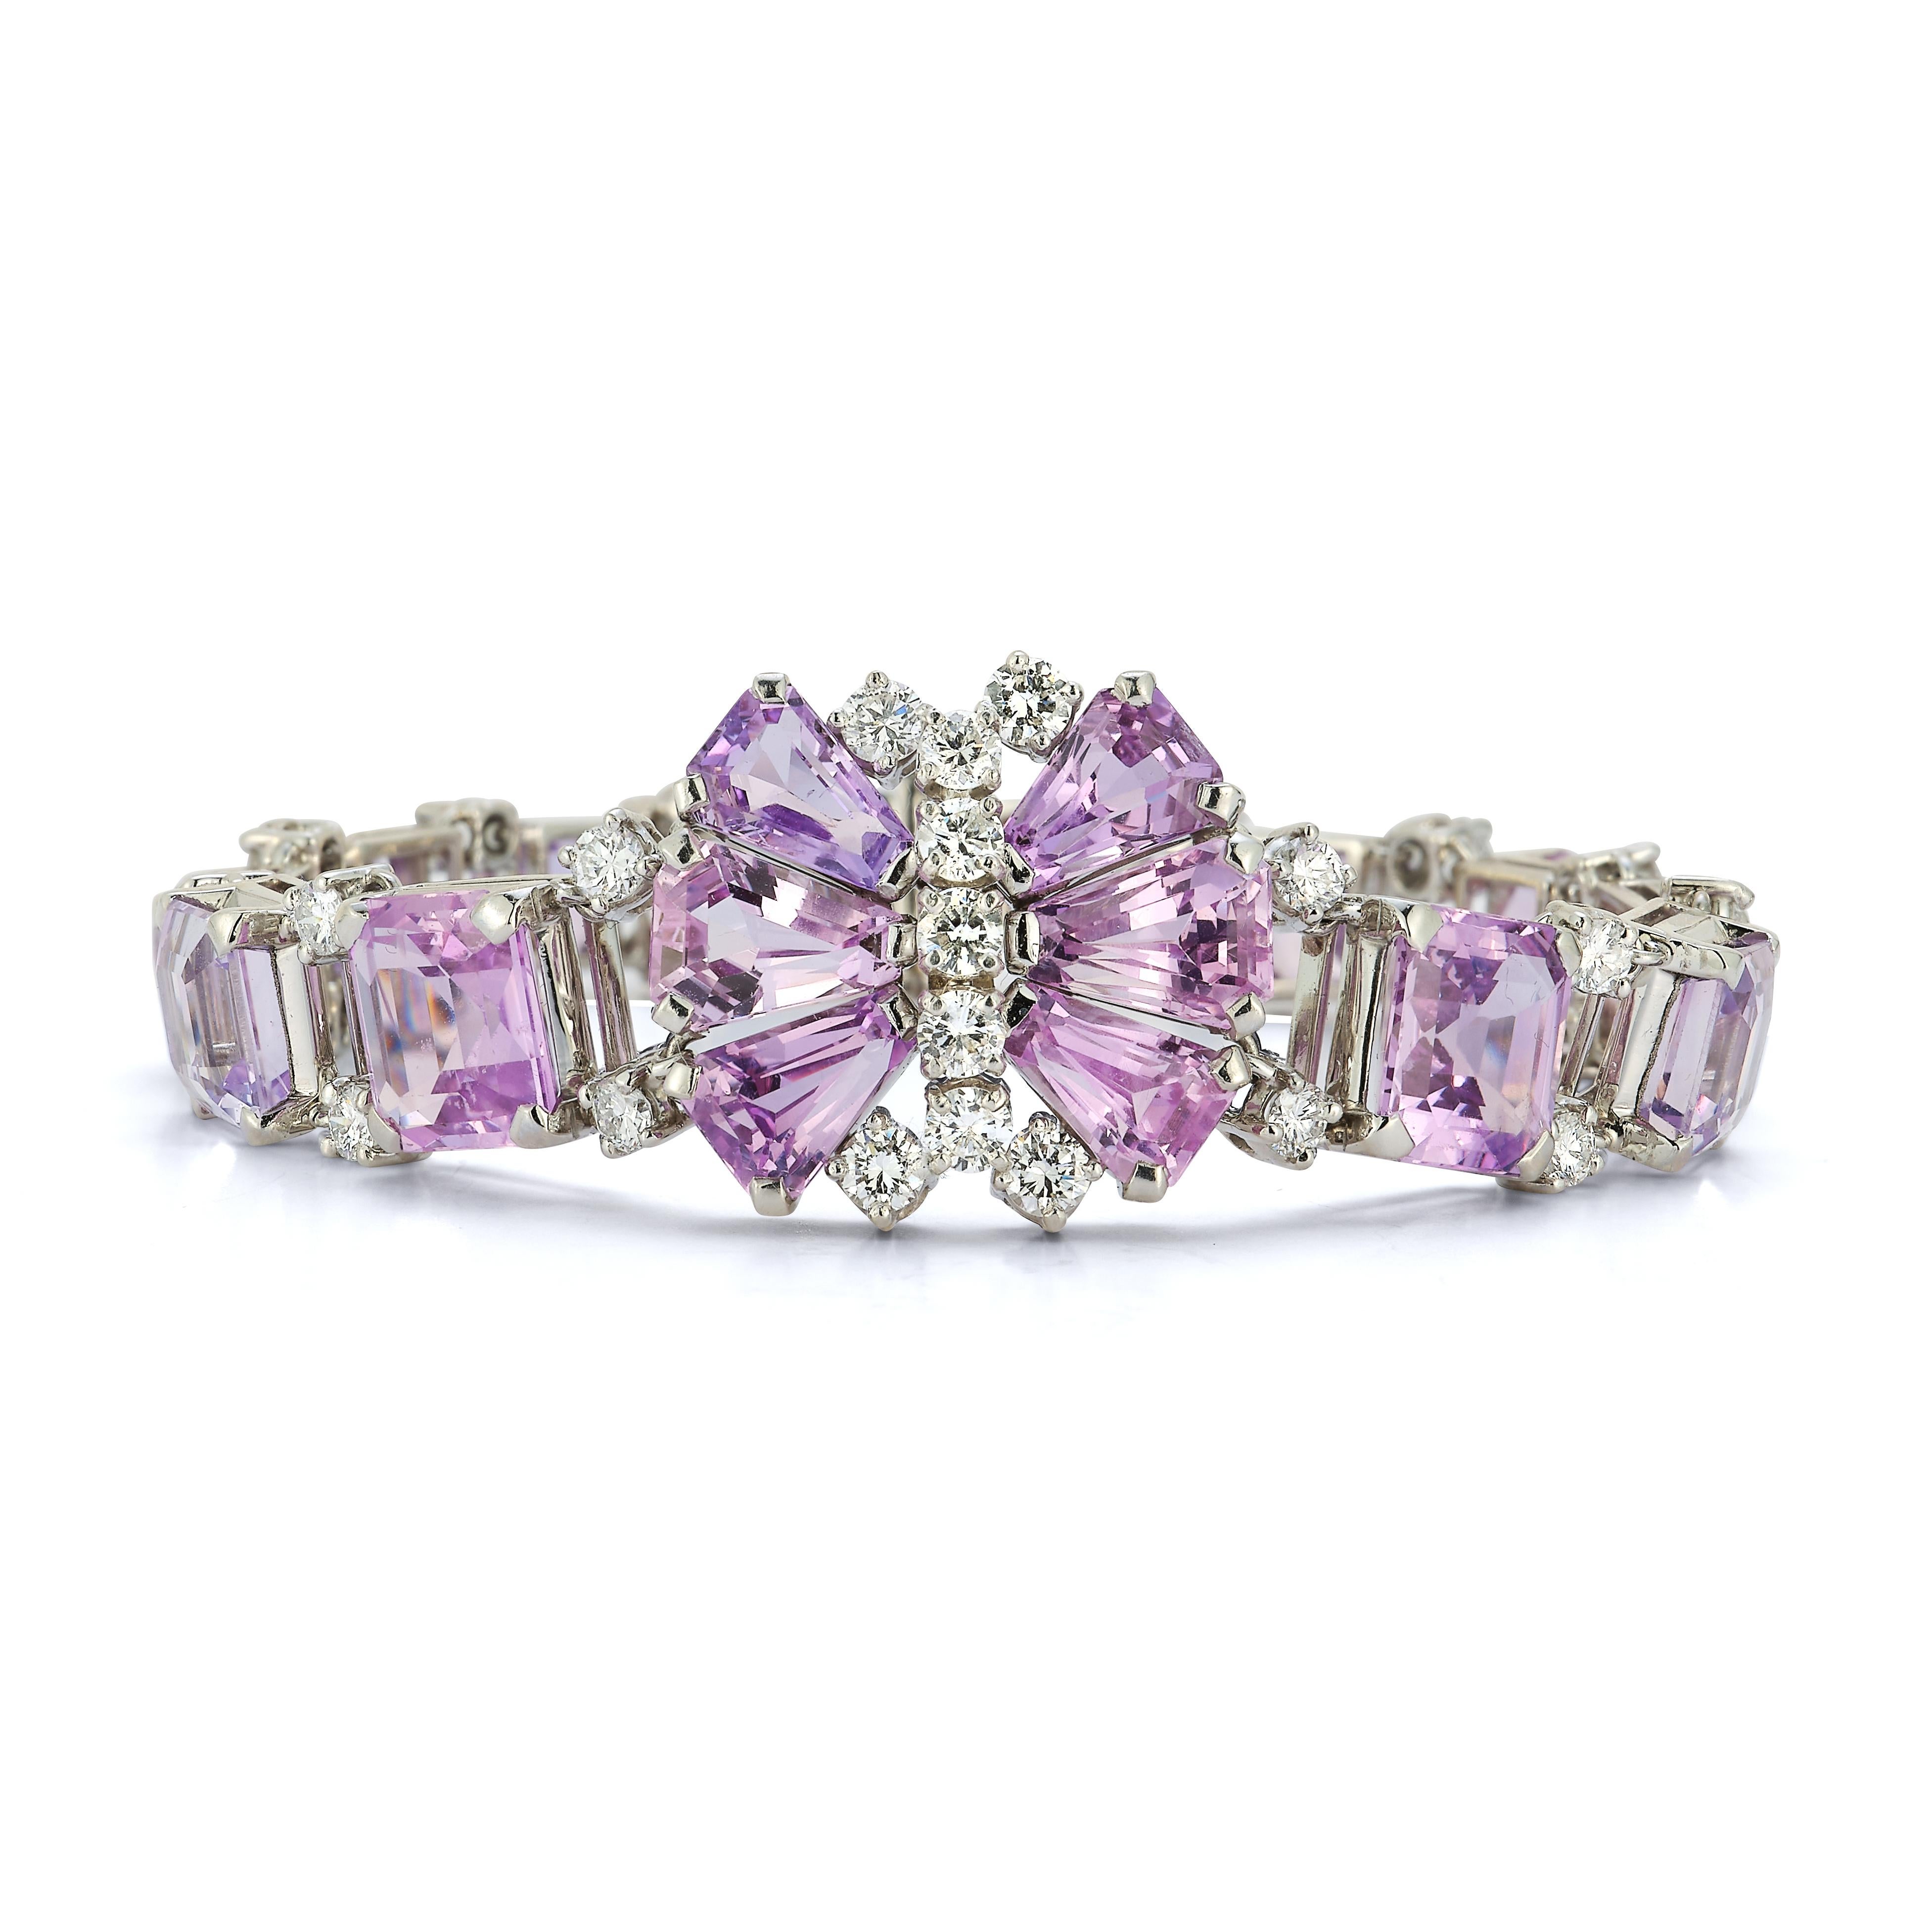 Oscar Heyman Brothers Pink Sapphire & Diamond Bracelet In Excellent Condition For Sale In New York, NY